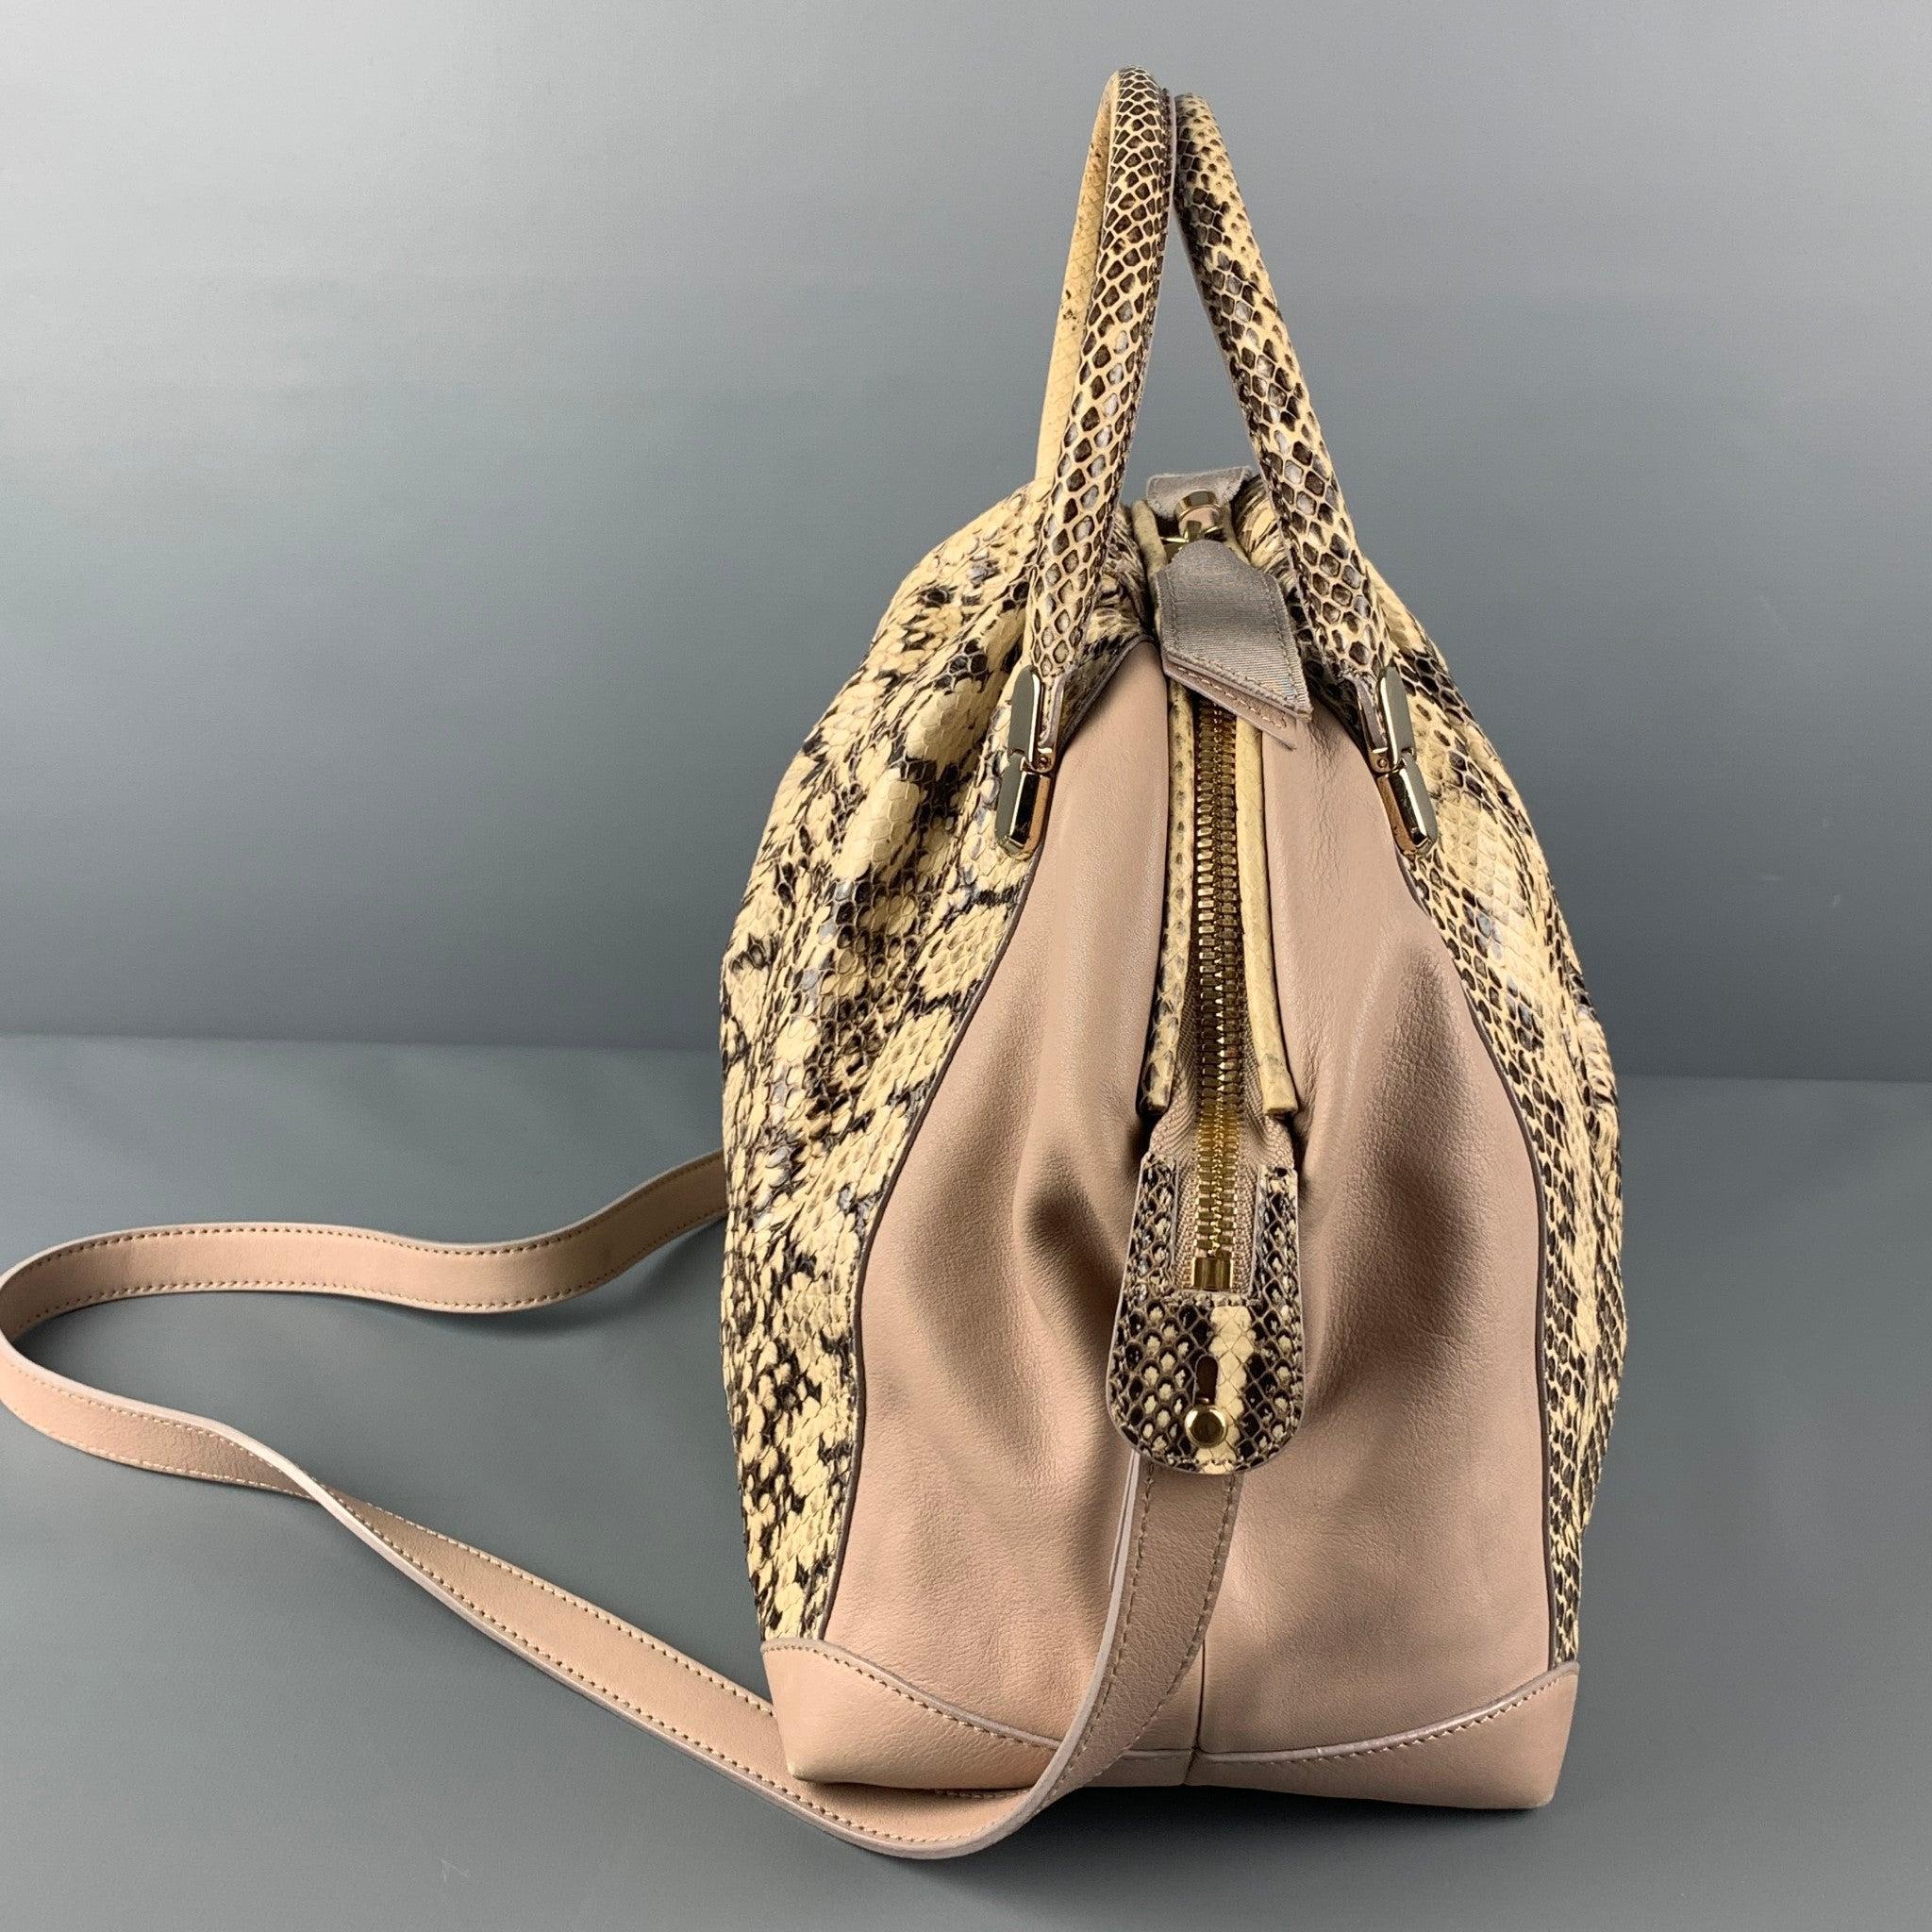 NINA RICCI bag comes in a beige & brown mixed leathers featuring top handles, removable shoulder straps, gold tone hardware, inner pocket, and a zipper closure. Made in Italy.
Very Good
Pre-Owned Condition. 

Measurements: 
  Length:12 inches 